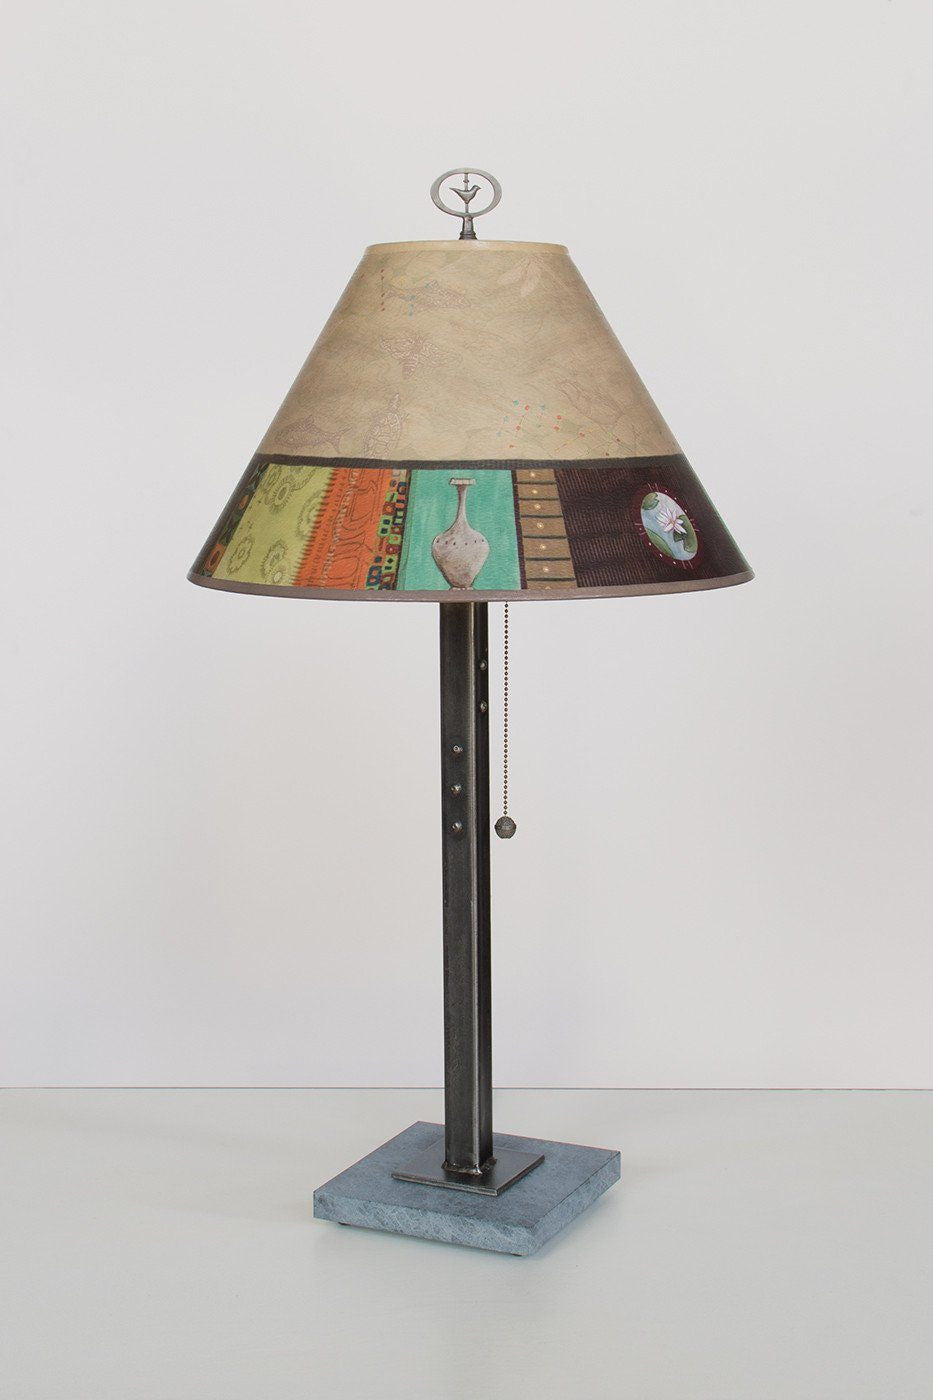 Steel Table Lamp on Marble with Medium Conical Shade in Linen Match